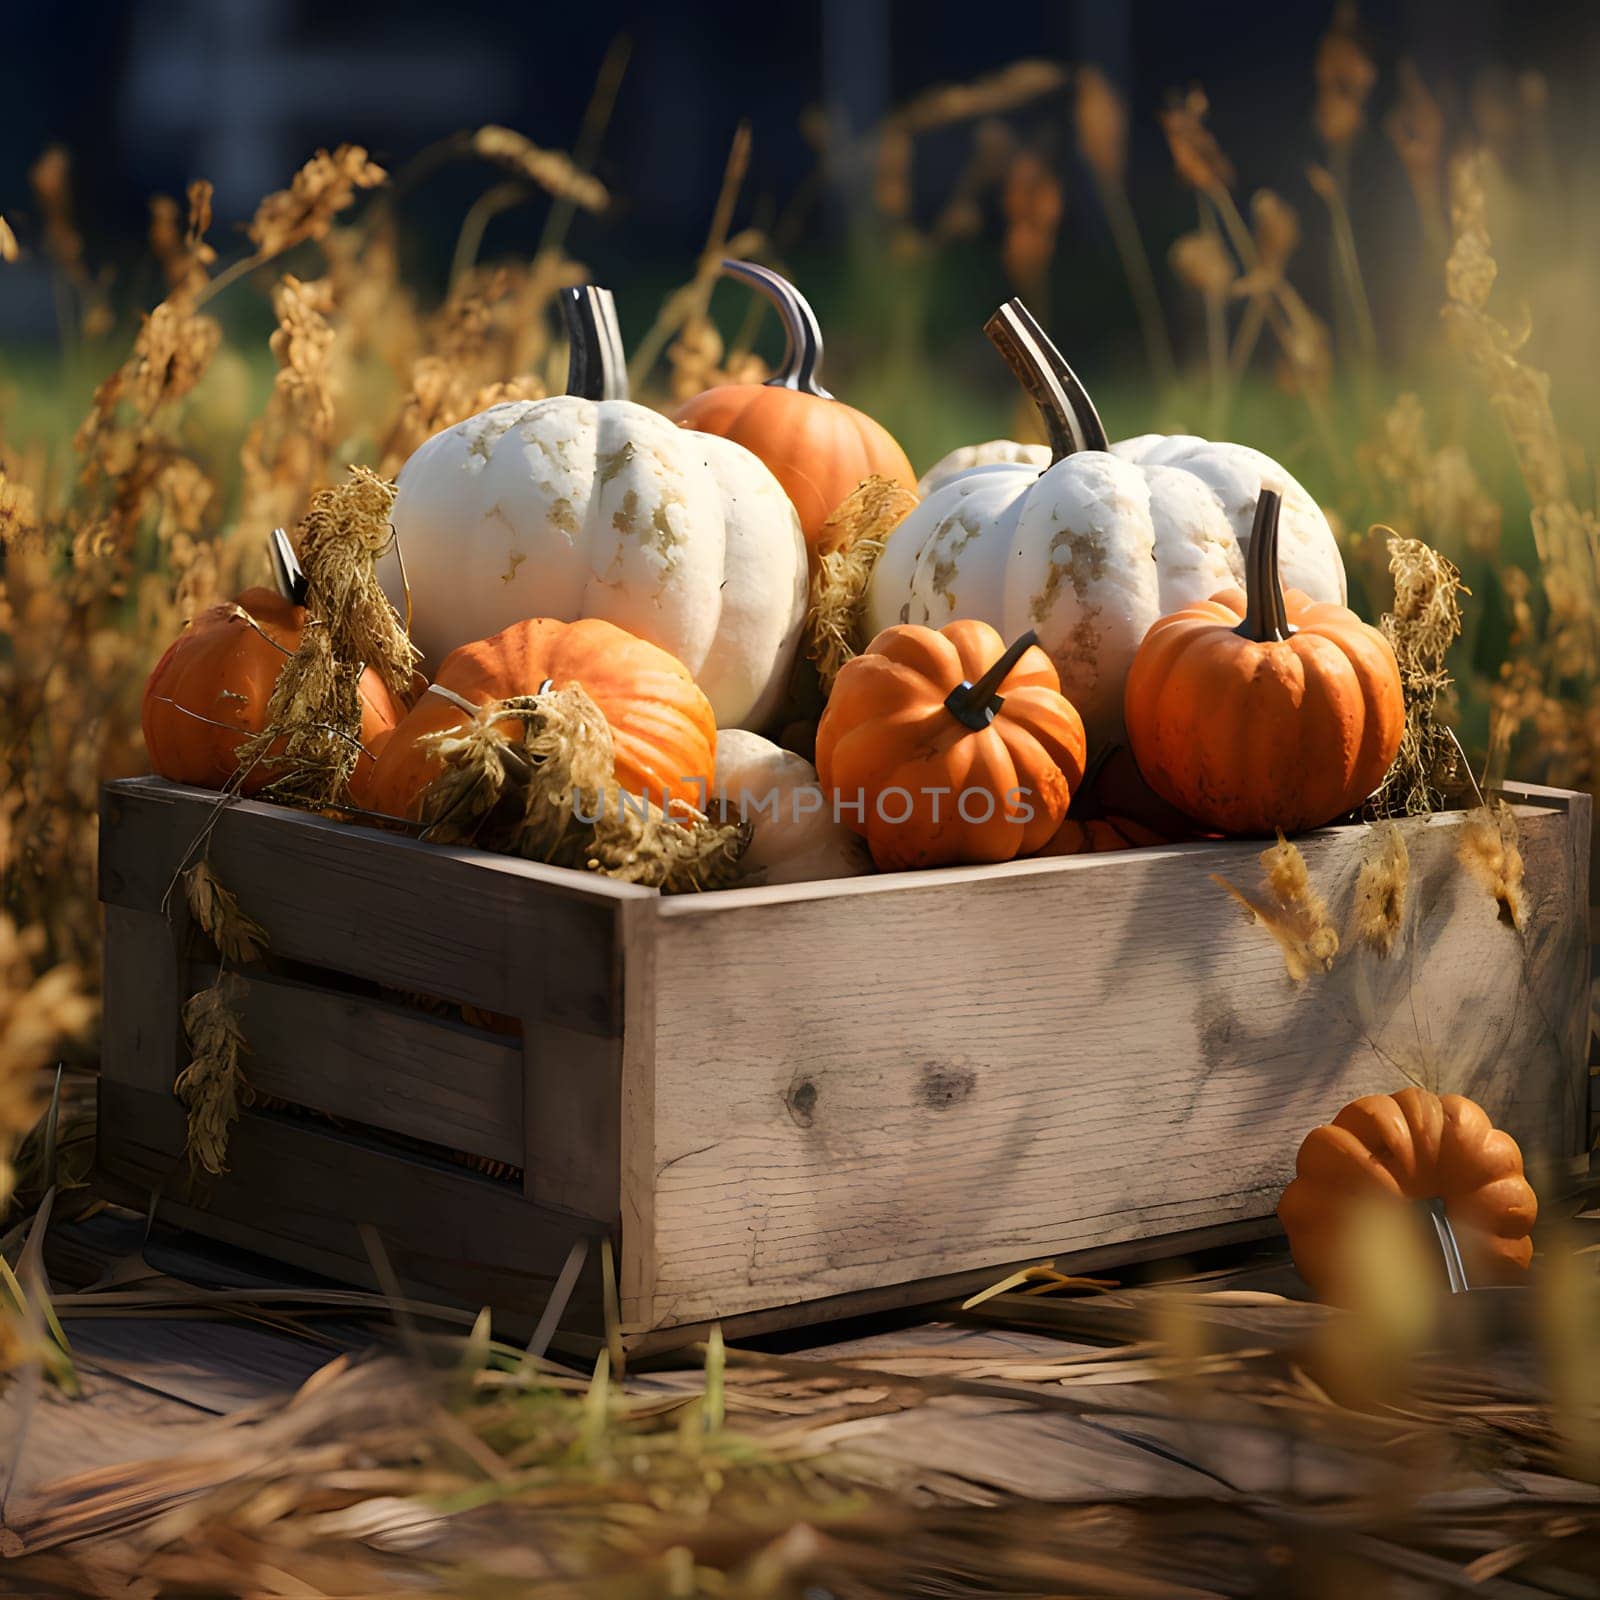 Small orange pumpkins in a wooden box in a field. Pumpkin as a dish of thanksgiving for the harvest. An atmosphere of joy and celebration.